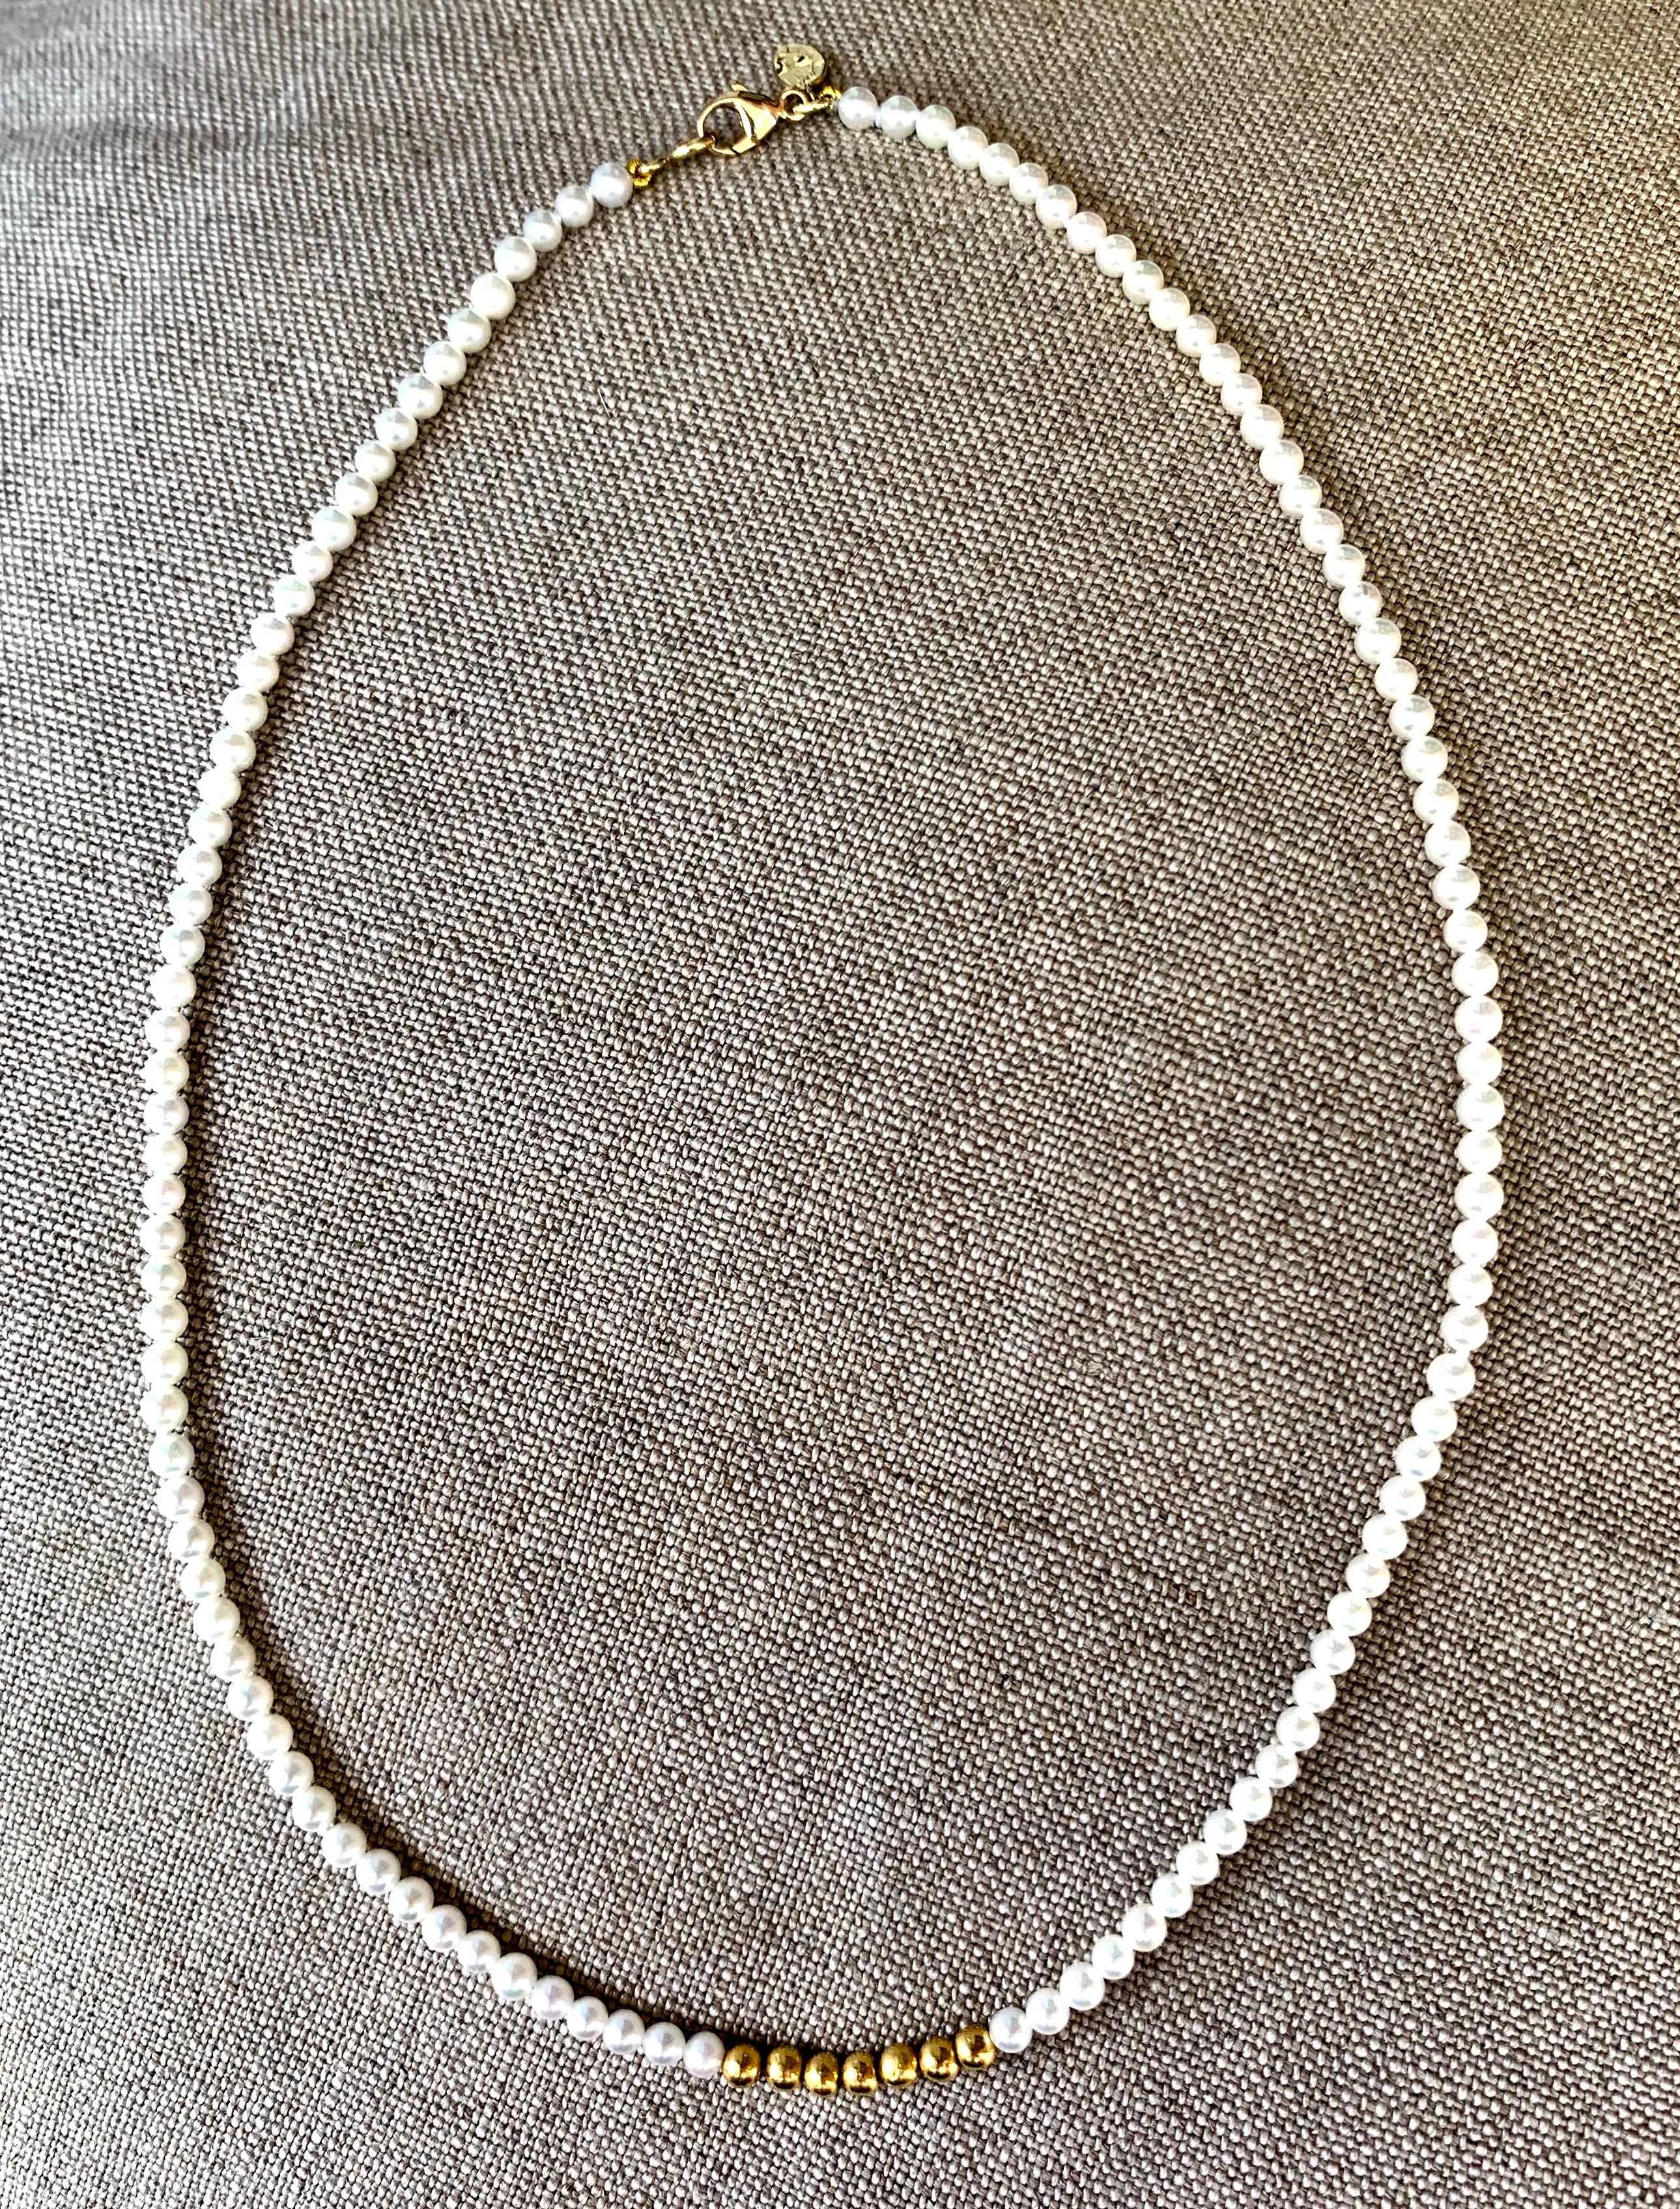 pearl and gold bead necklace